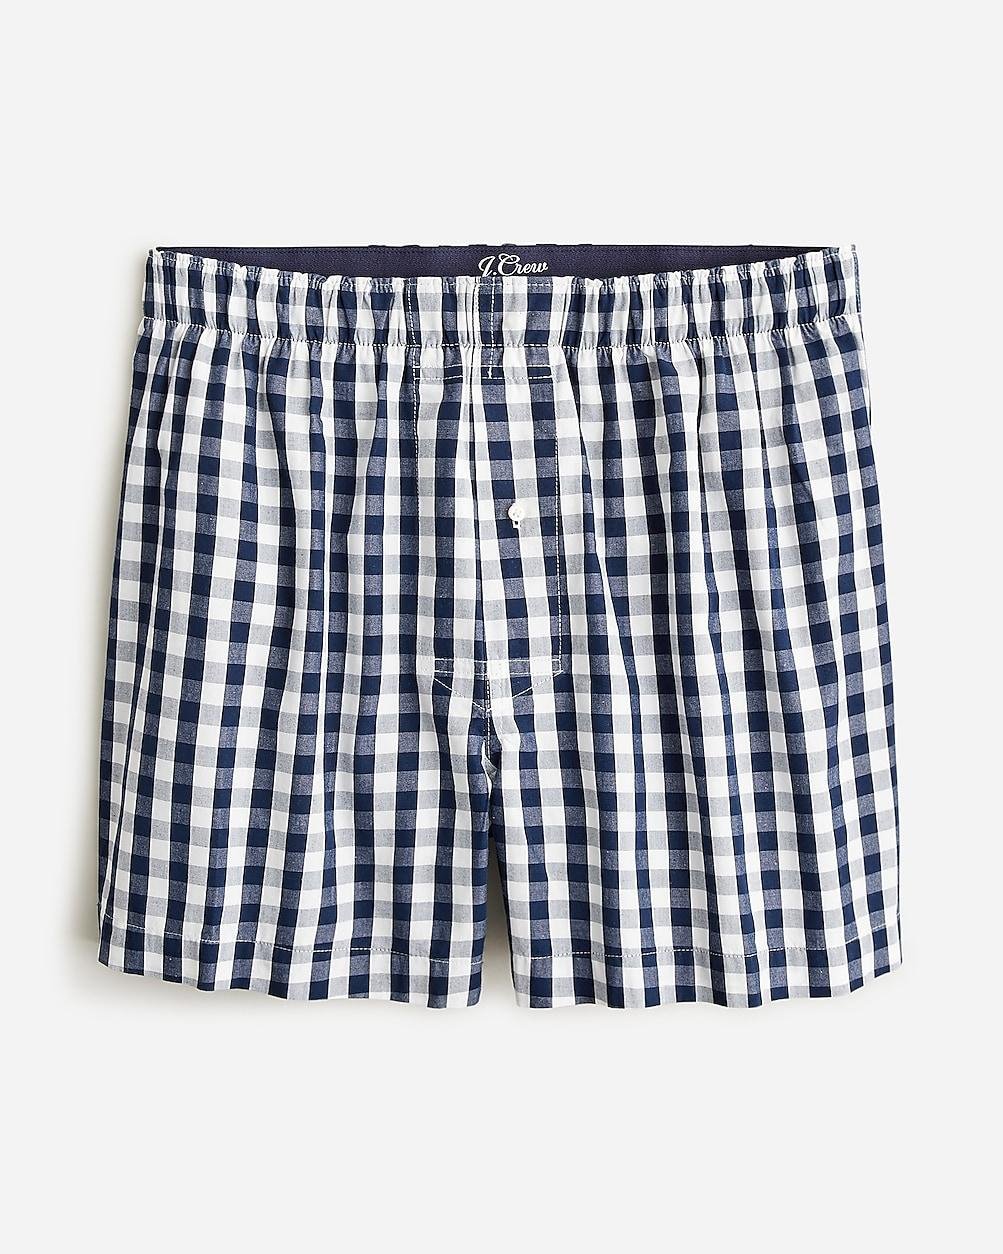 Patterned boxers by J.CREW